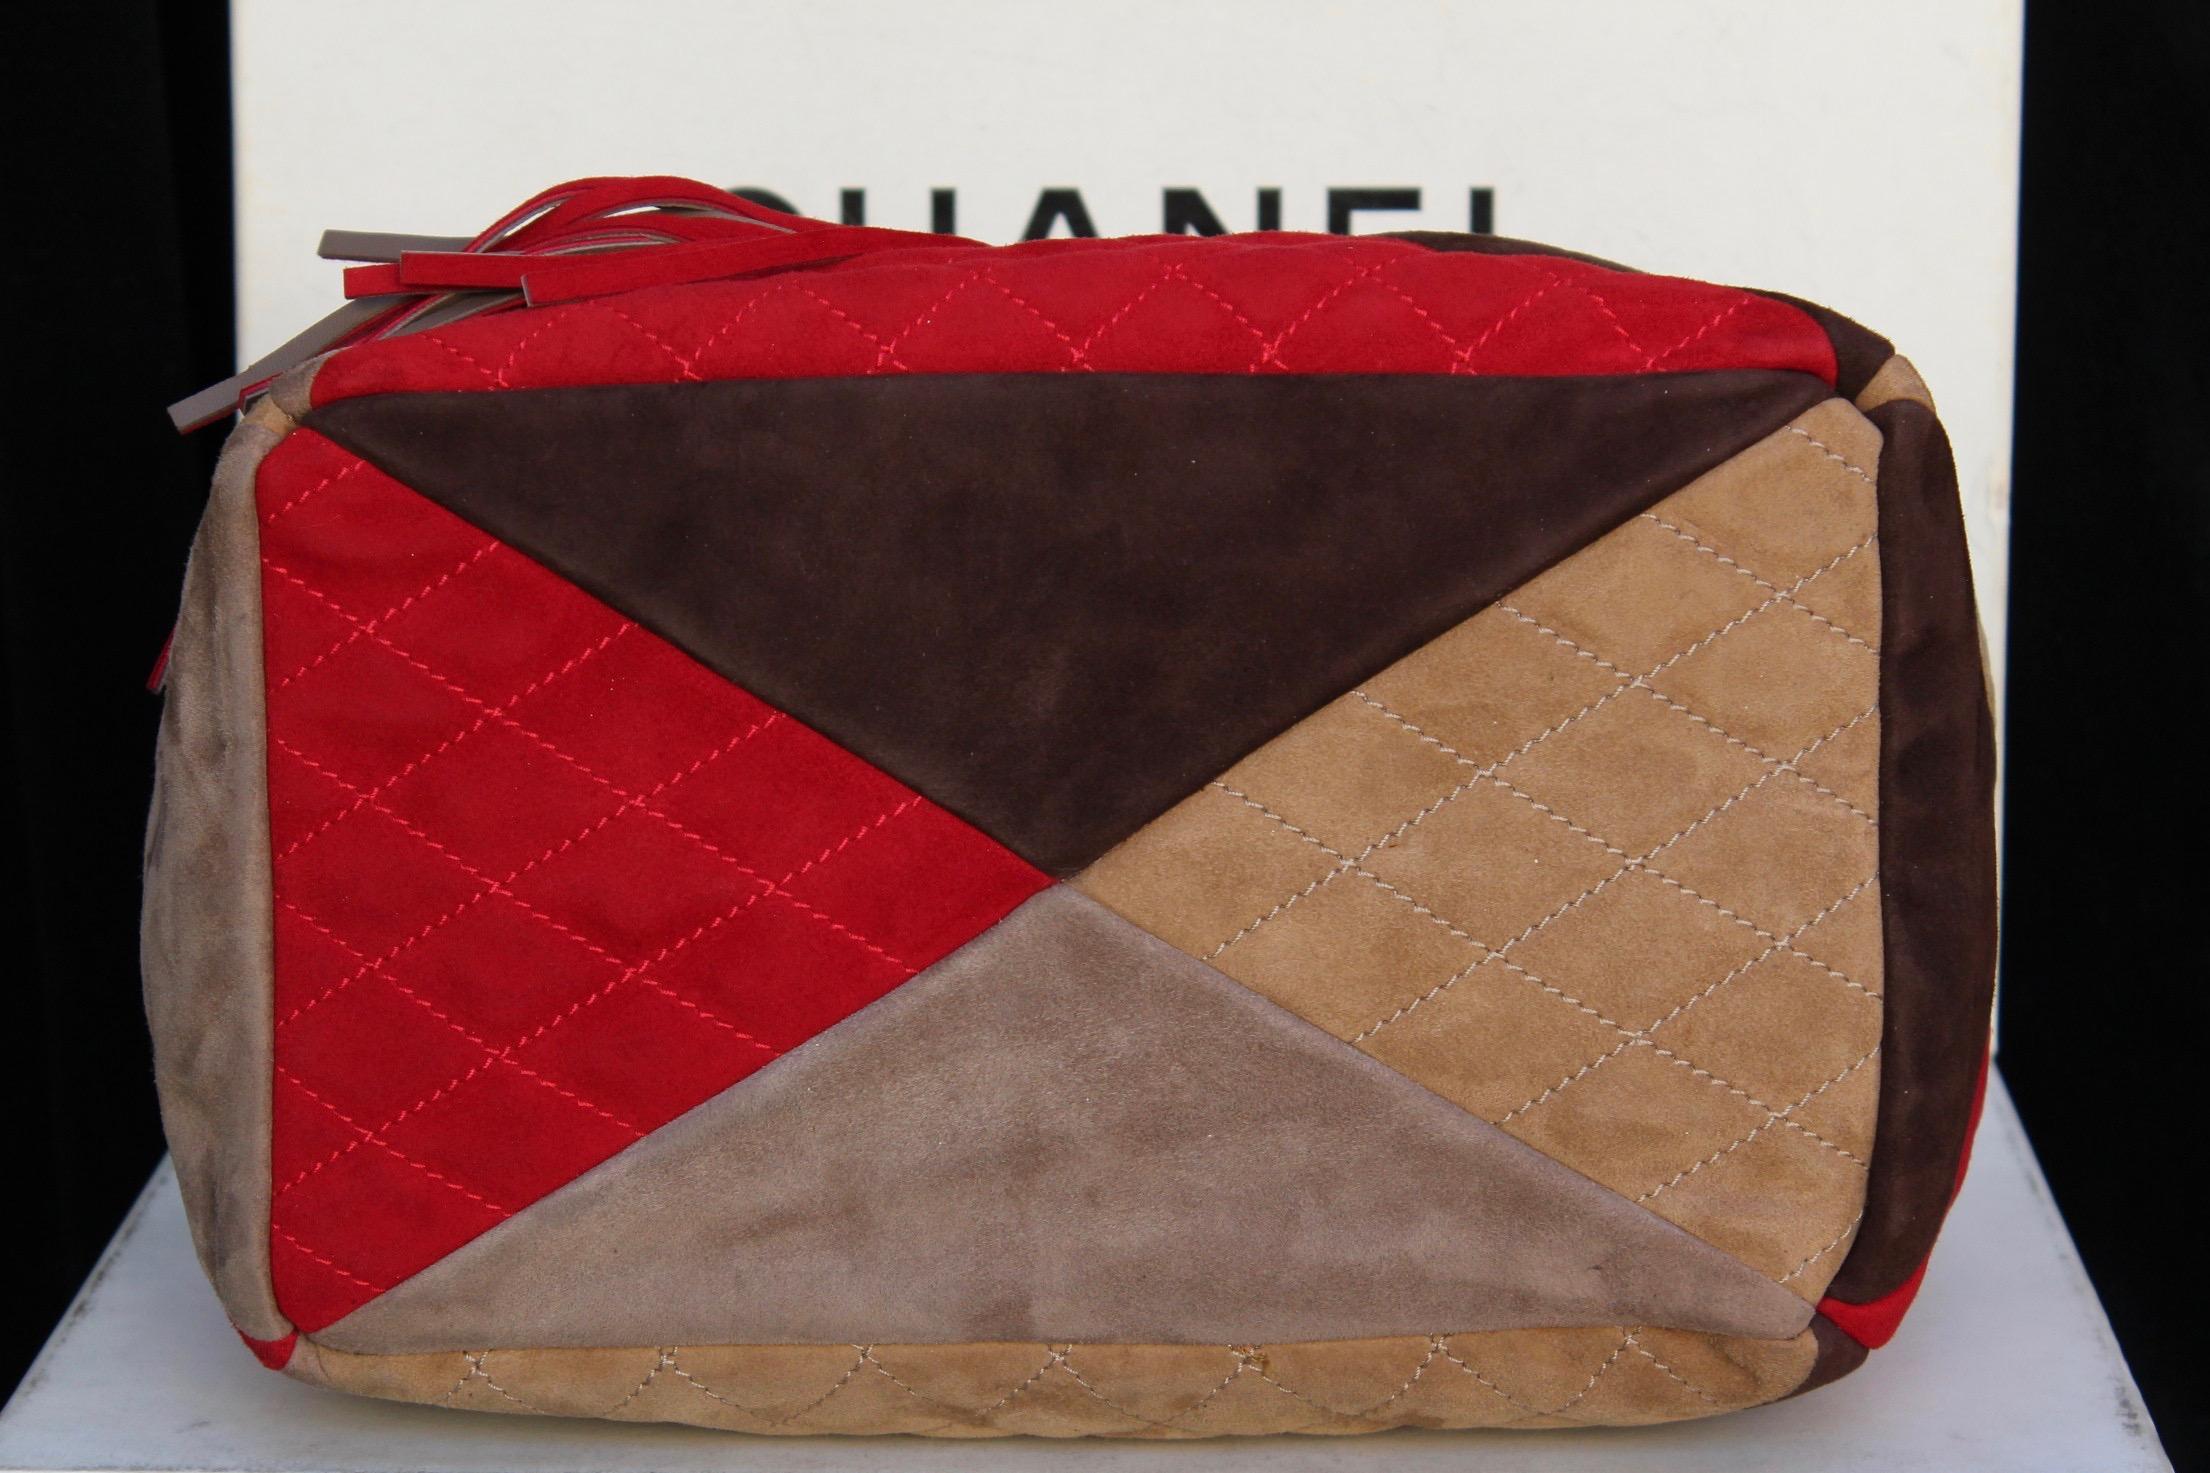 Women's Chanel large suede patchwork tote bag in beige, brown and red colors